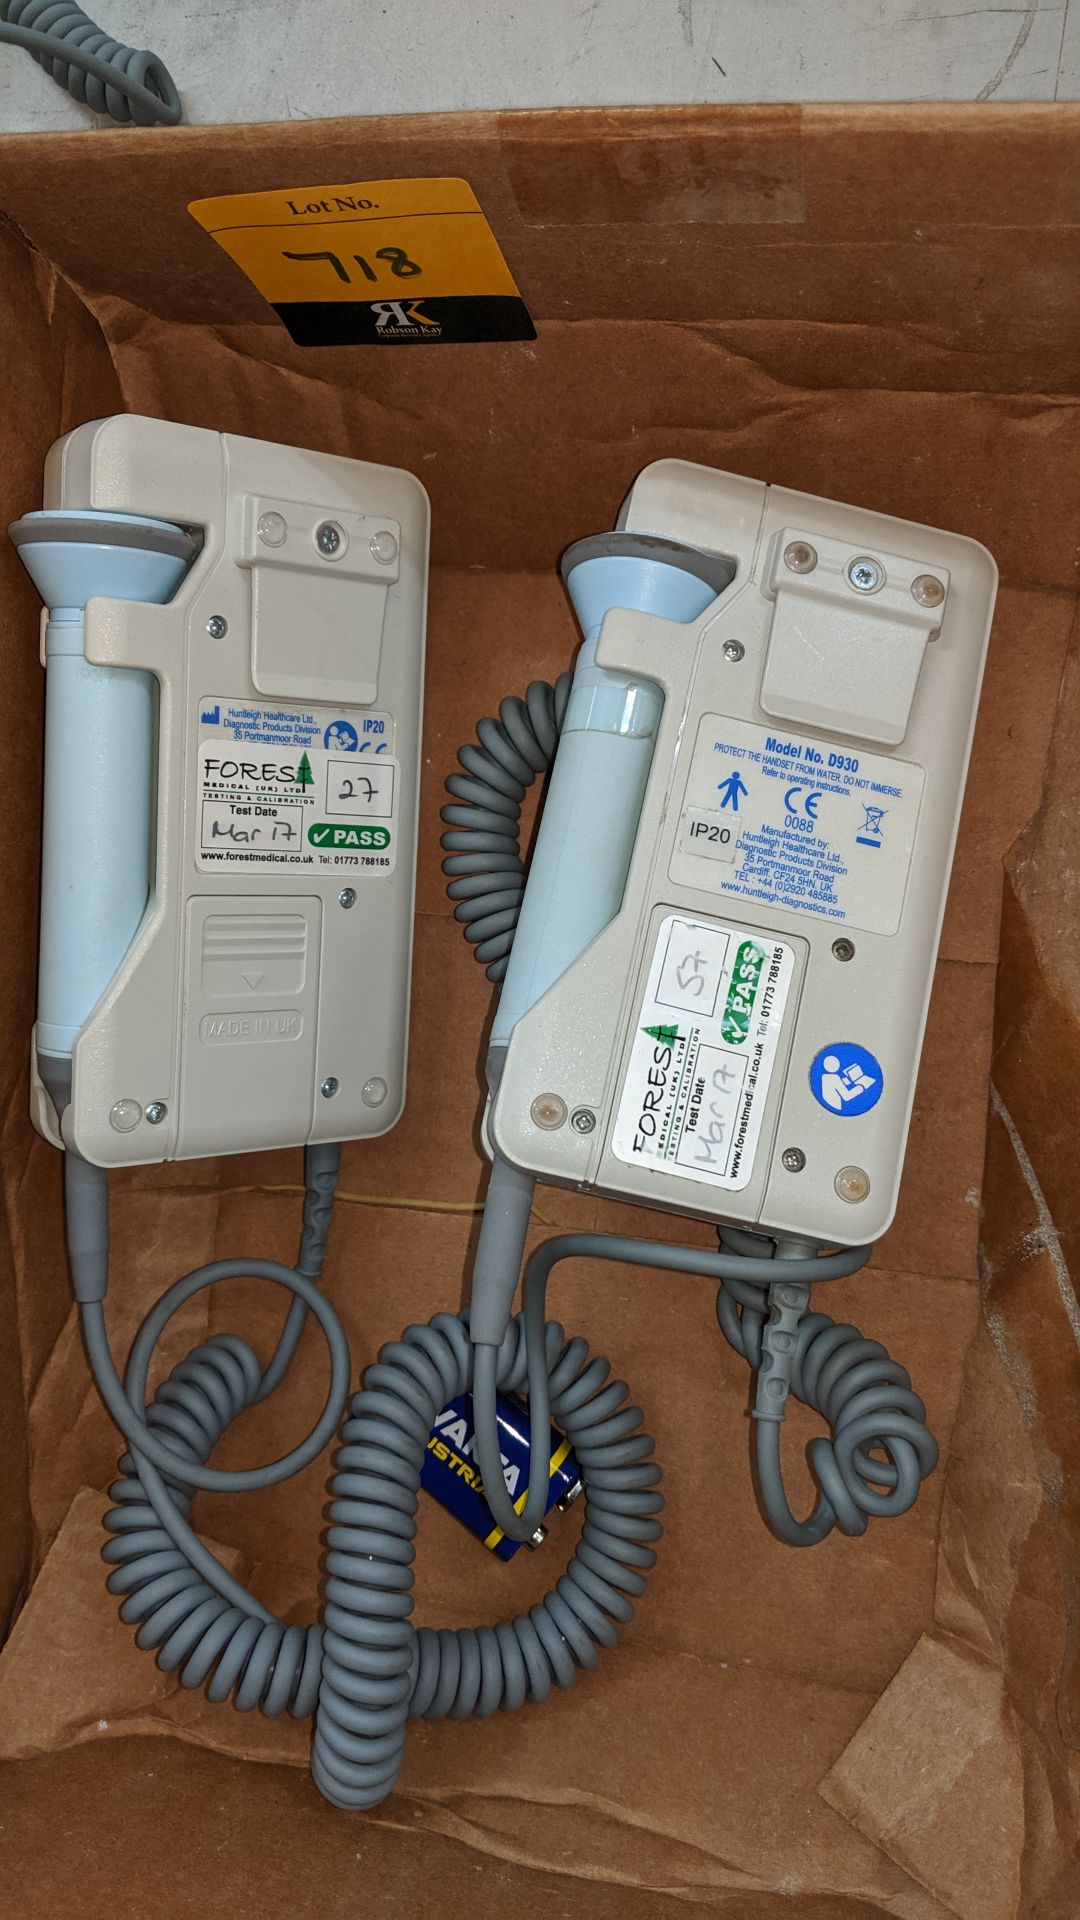 2 off Huntleigh Sonicaid D930 Fetal Doppler testers - in a box marked as being faulty. This is one - Image 4 of 4